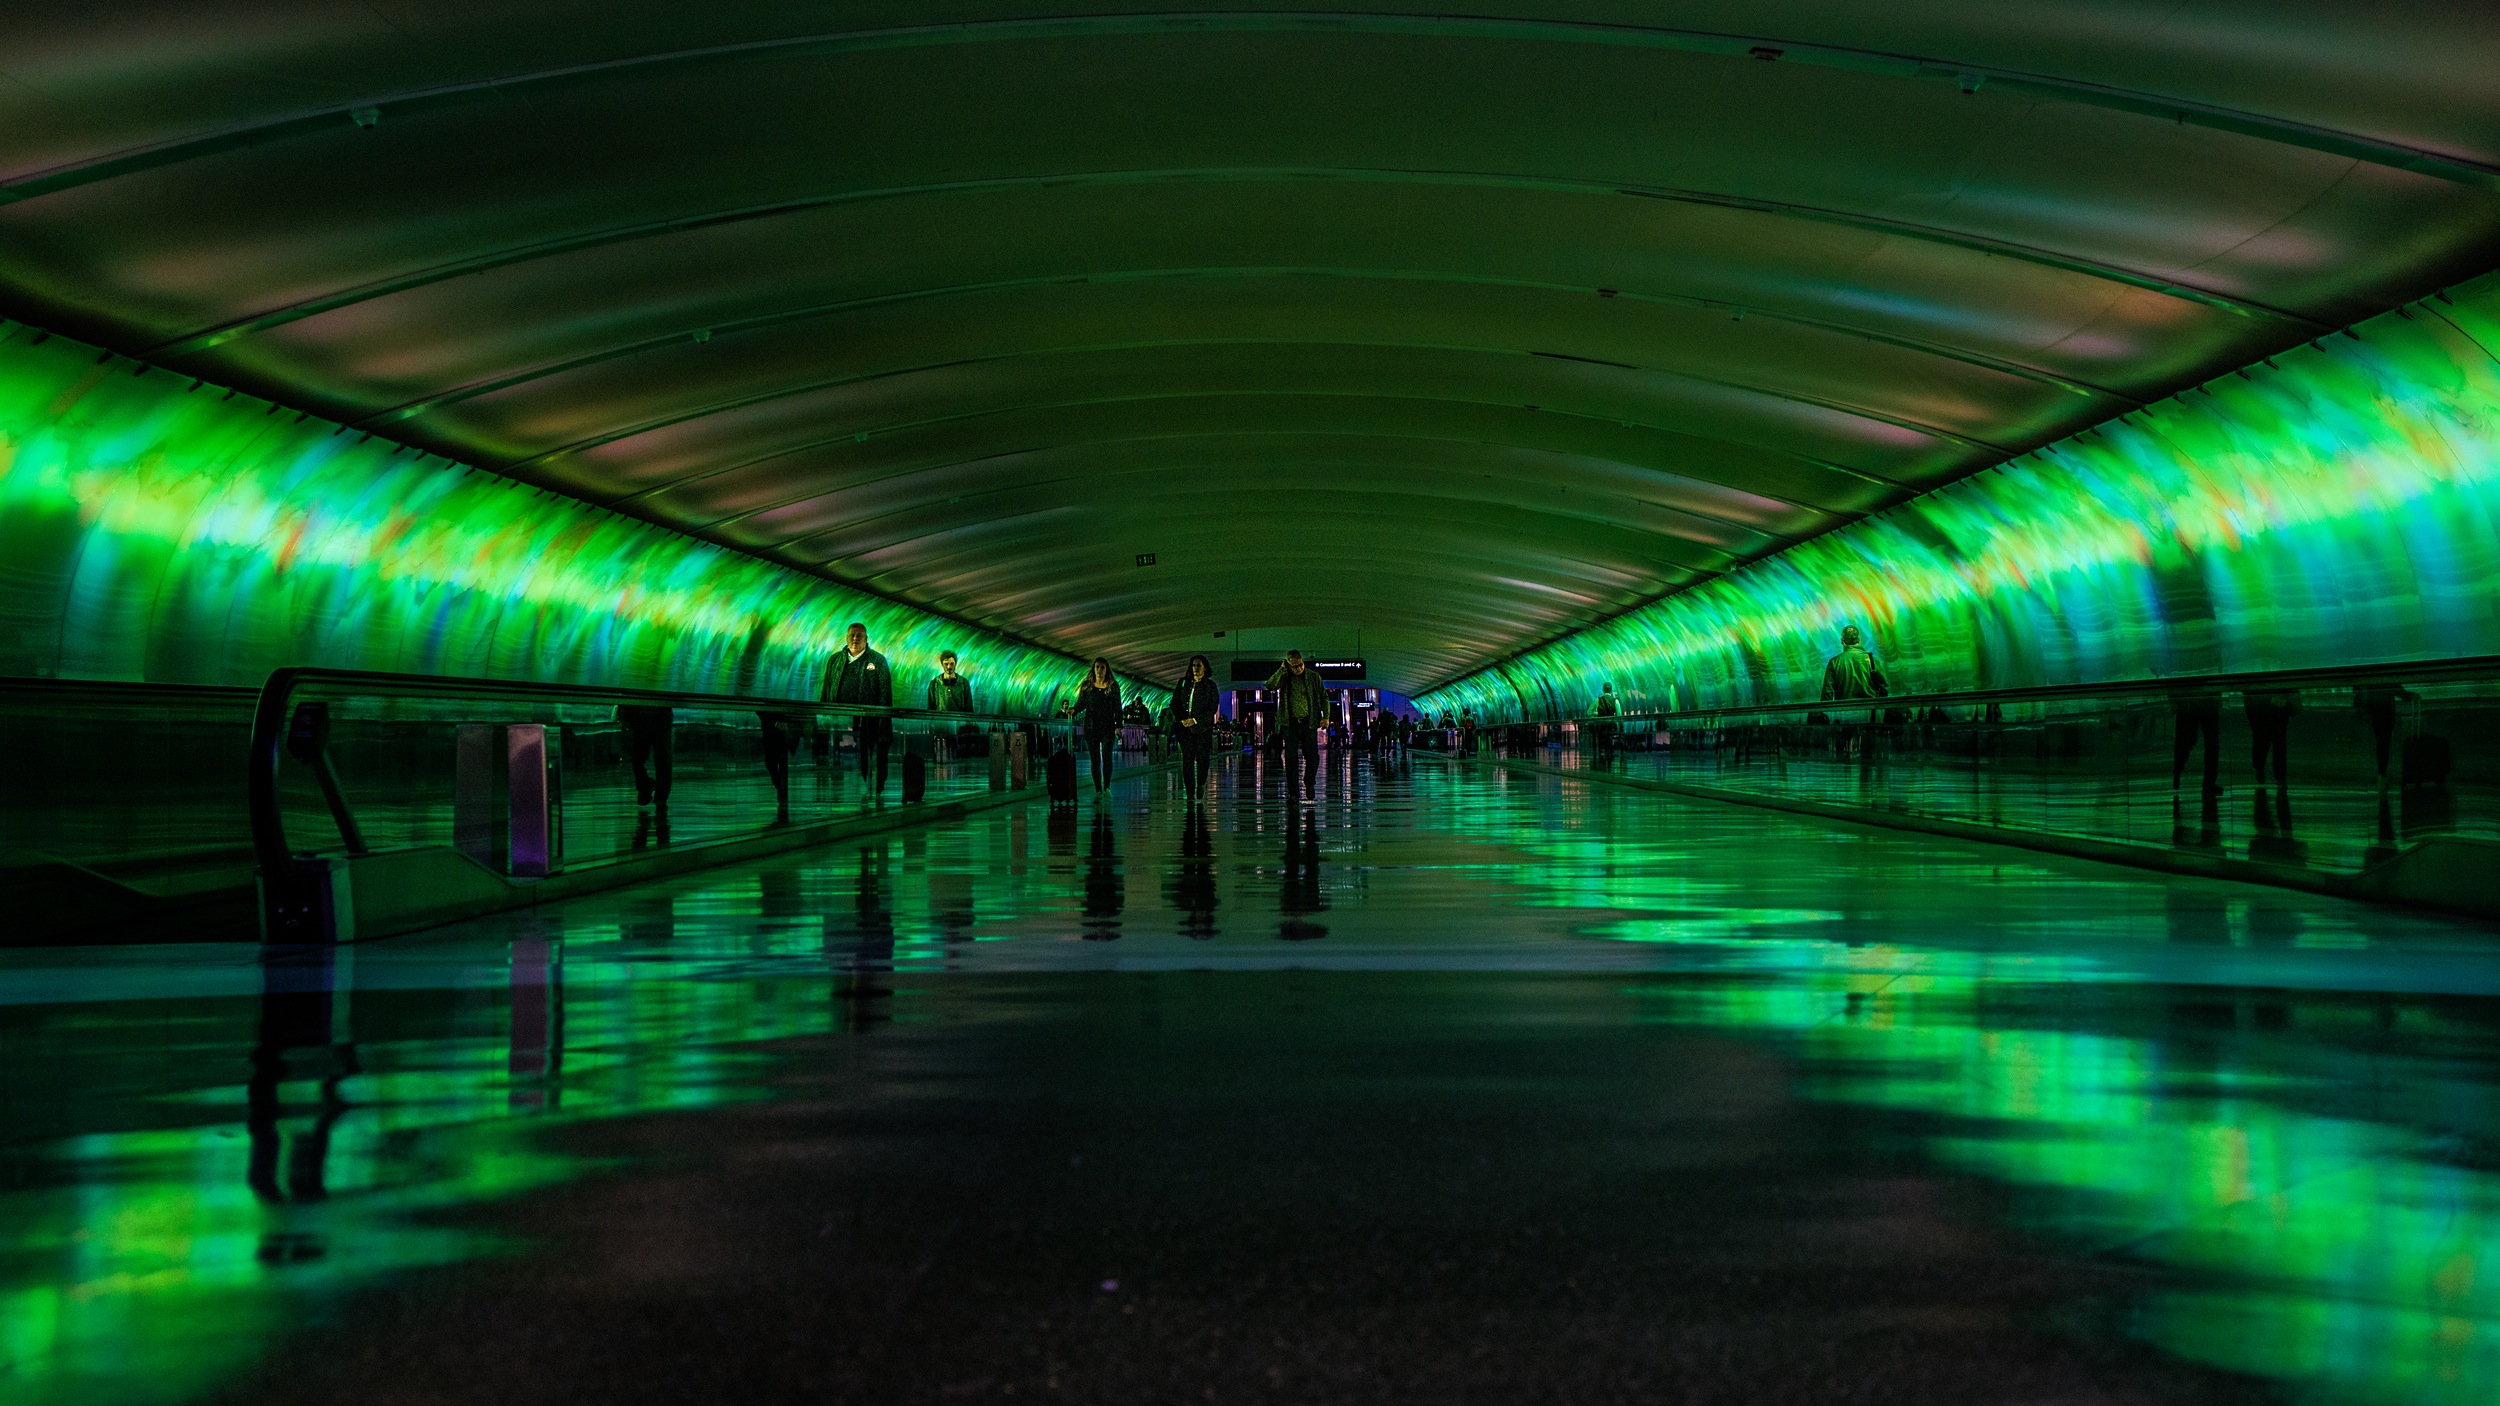 green-illuminated-transit-tunnel-with-travellators-and-people